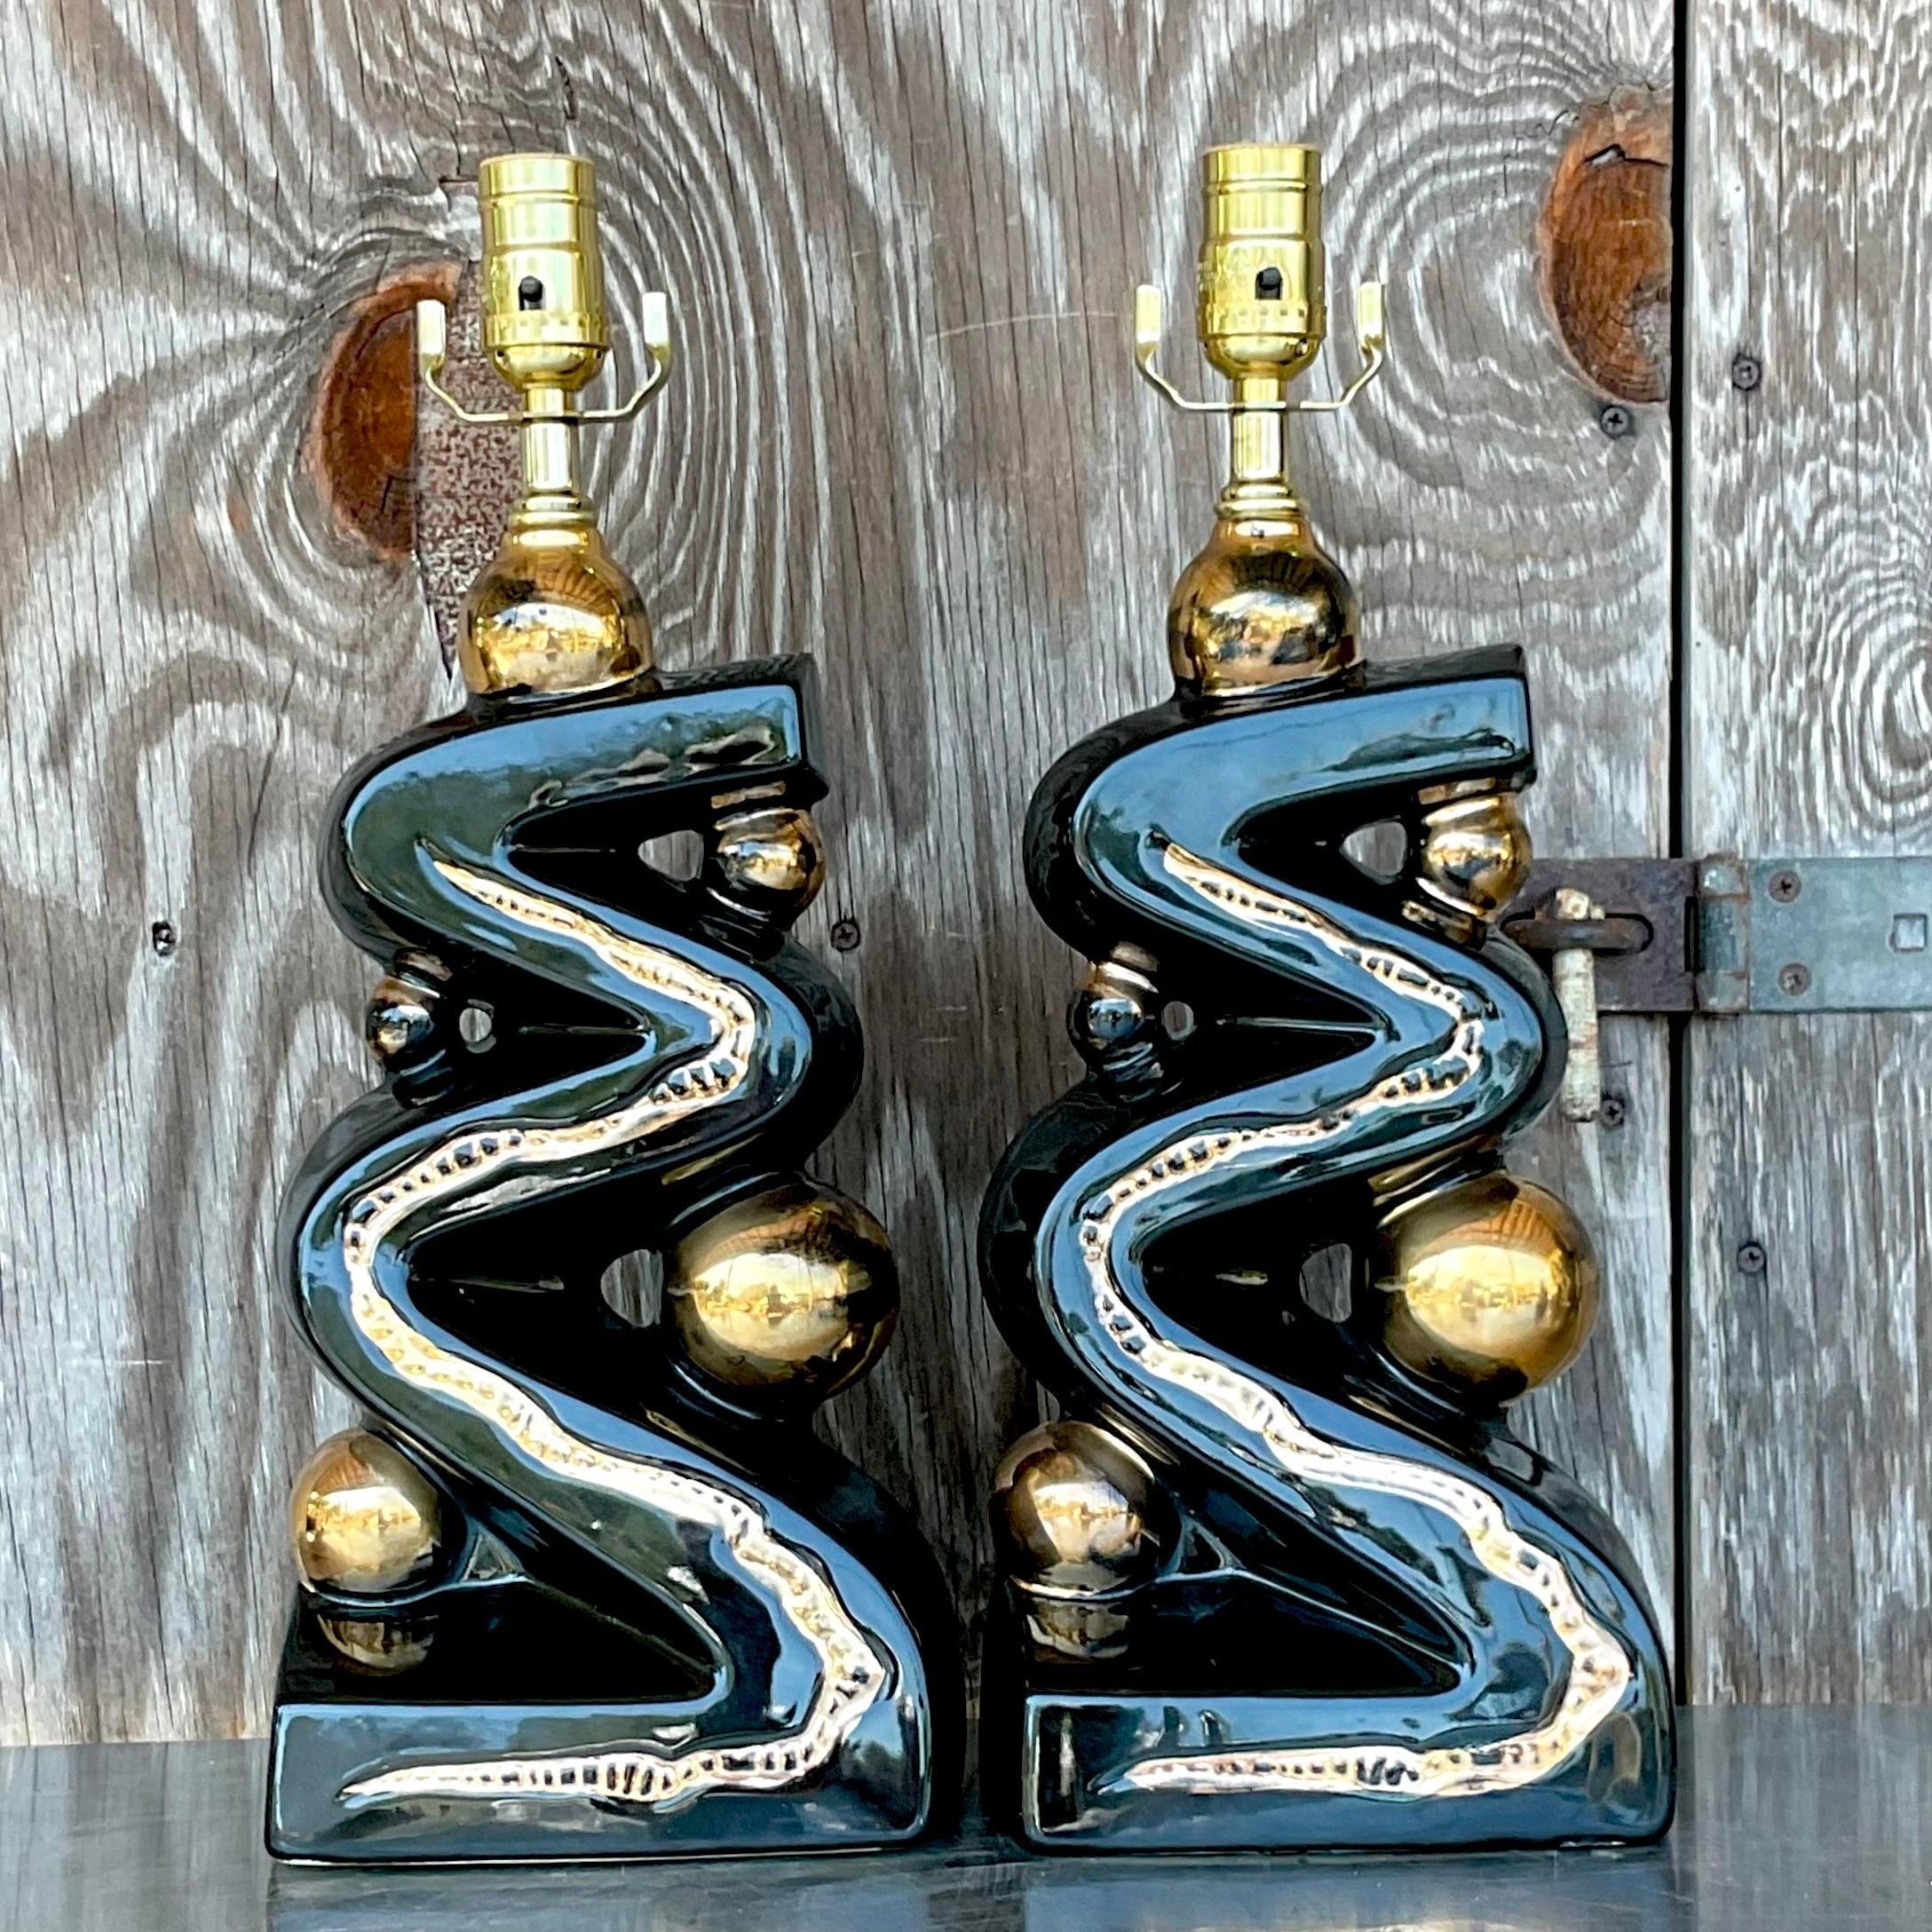 A striking pair of vintage MCM table lamps. A chic zig zag design in glamorous black and gold. Fully restored with all new hardware and wiring. Acquired from a Palm Beach estate.